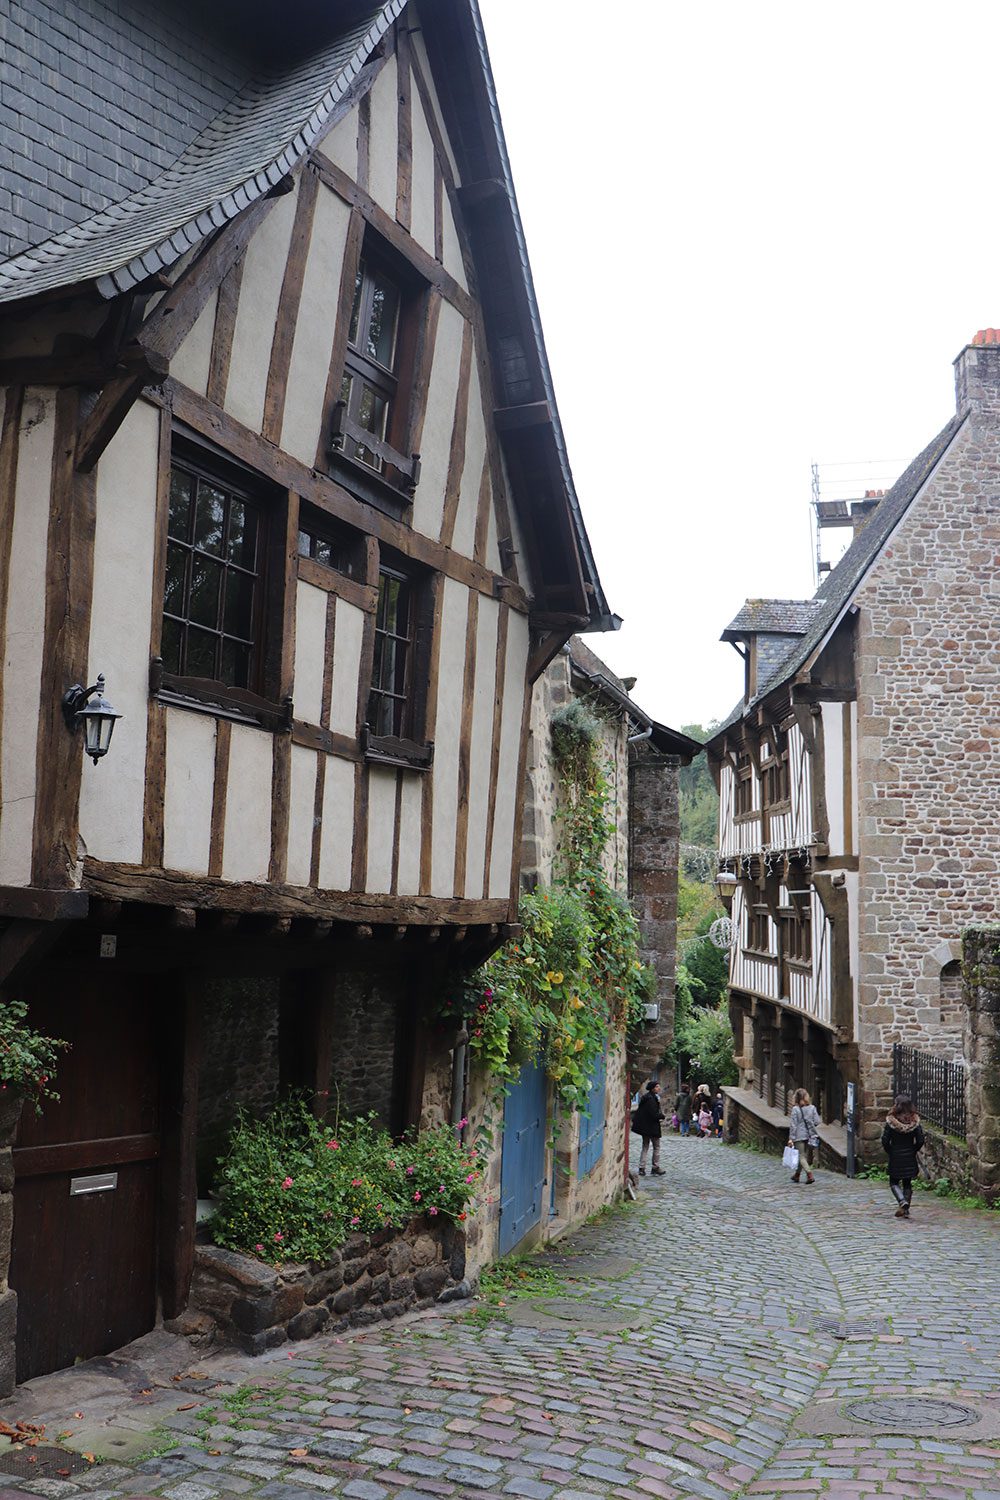 The streets of Dinan